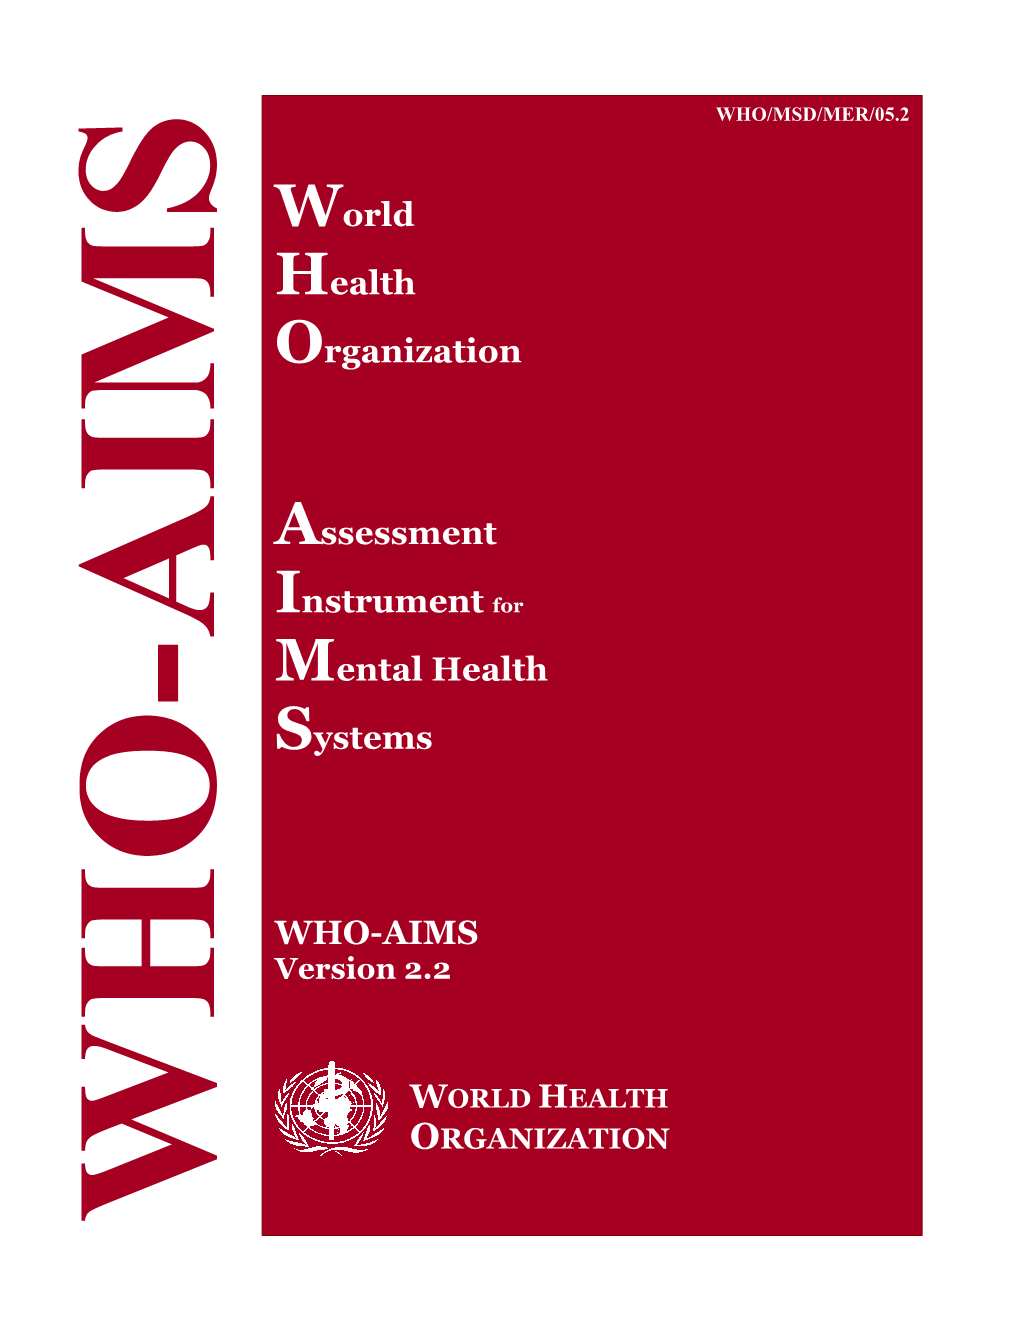 Assessment Instrument for Mental Health Systems WHO-AIMS